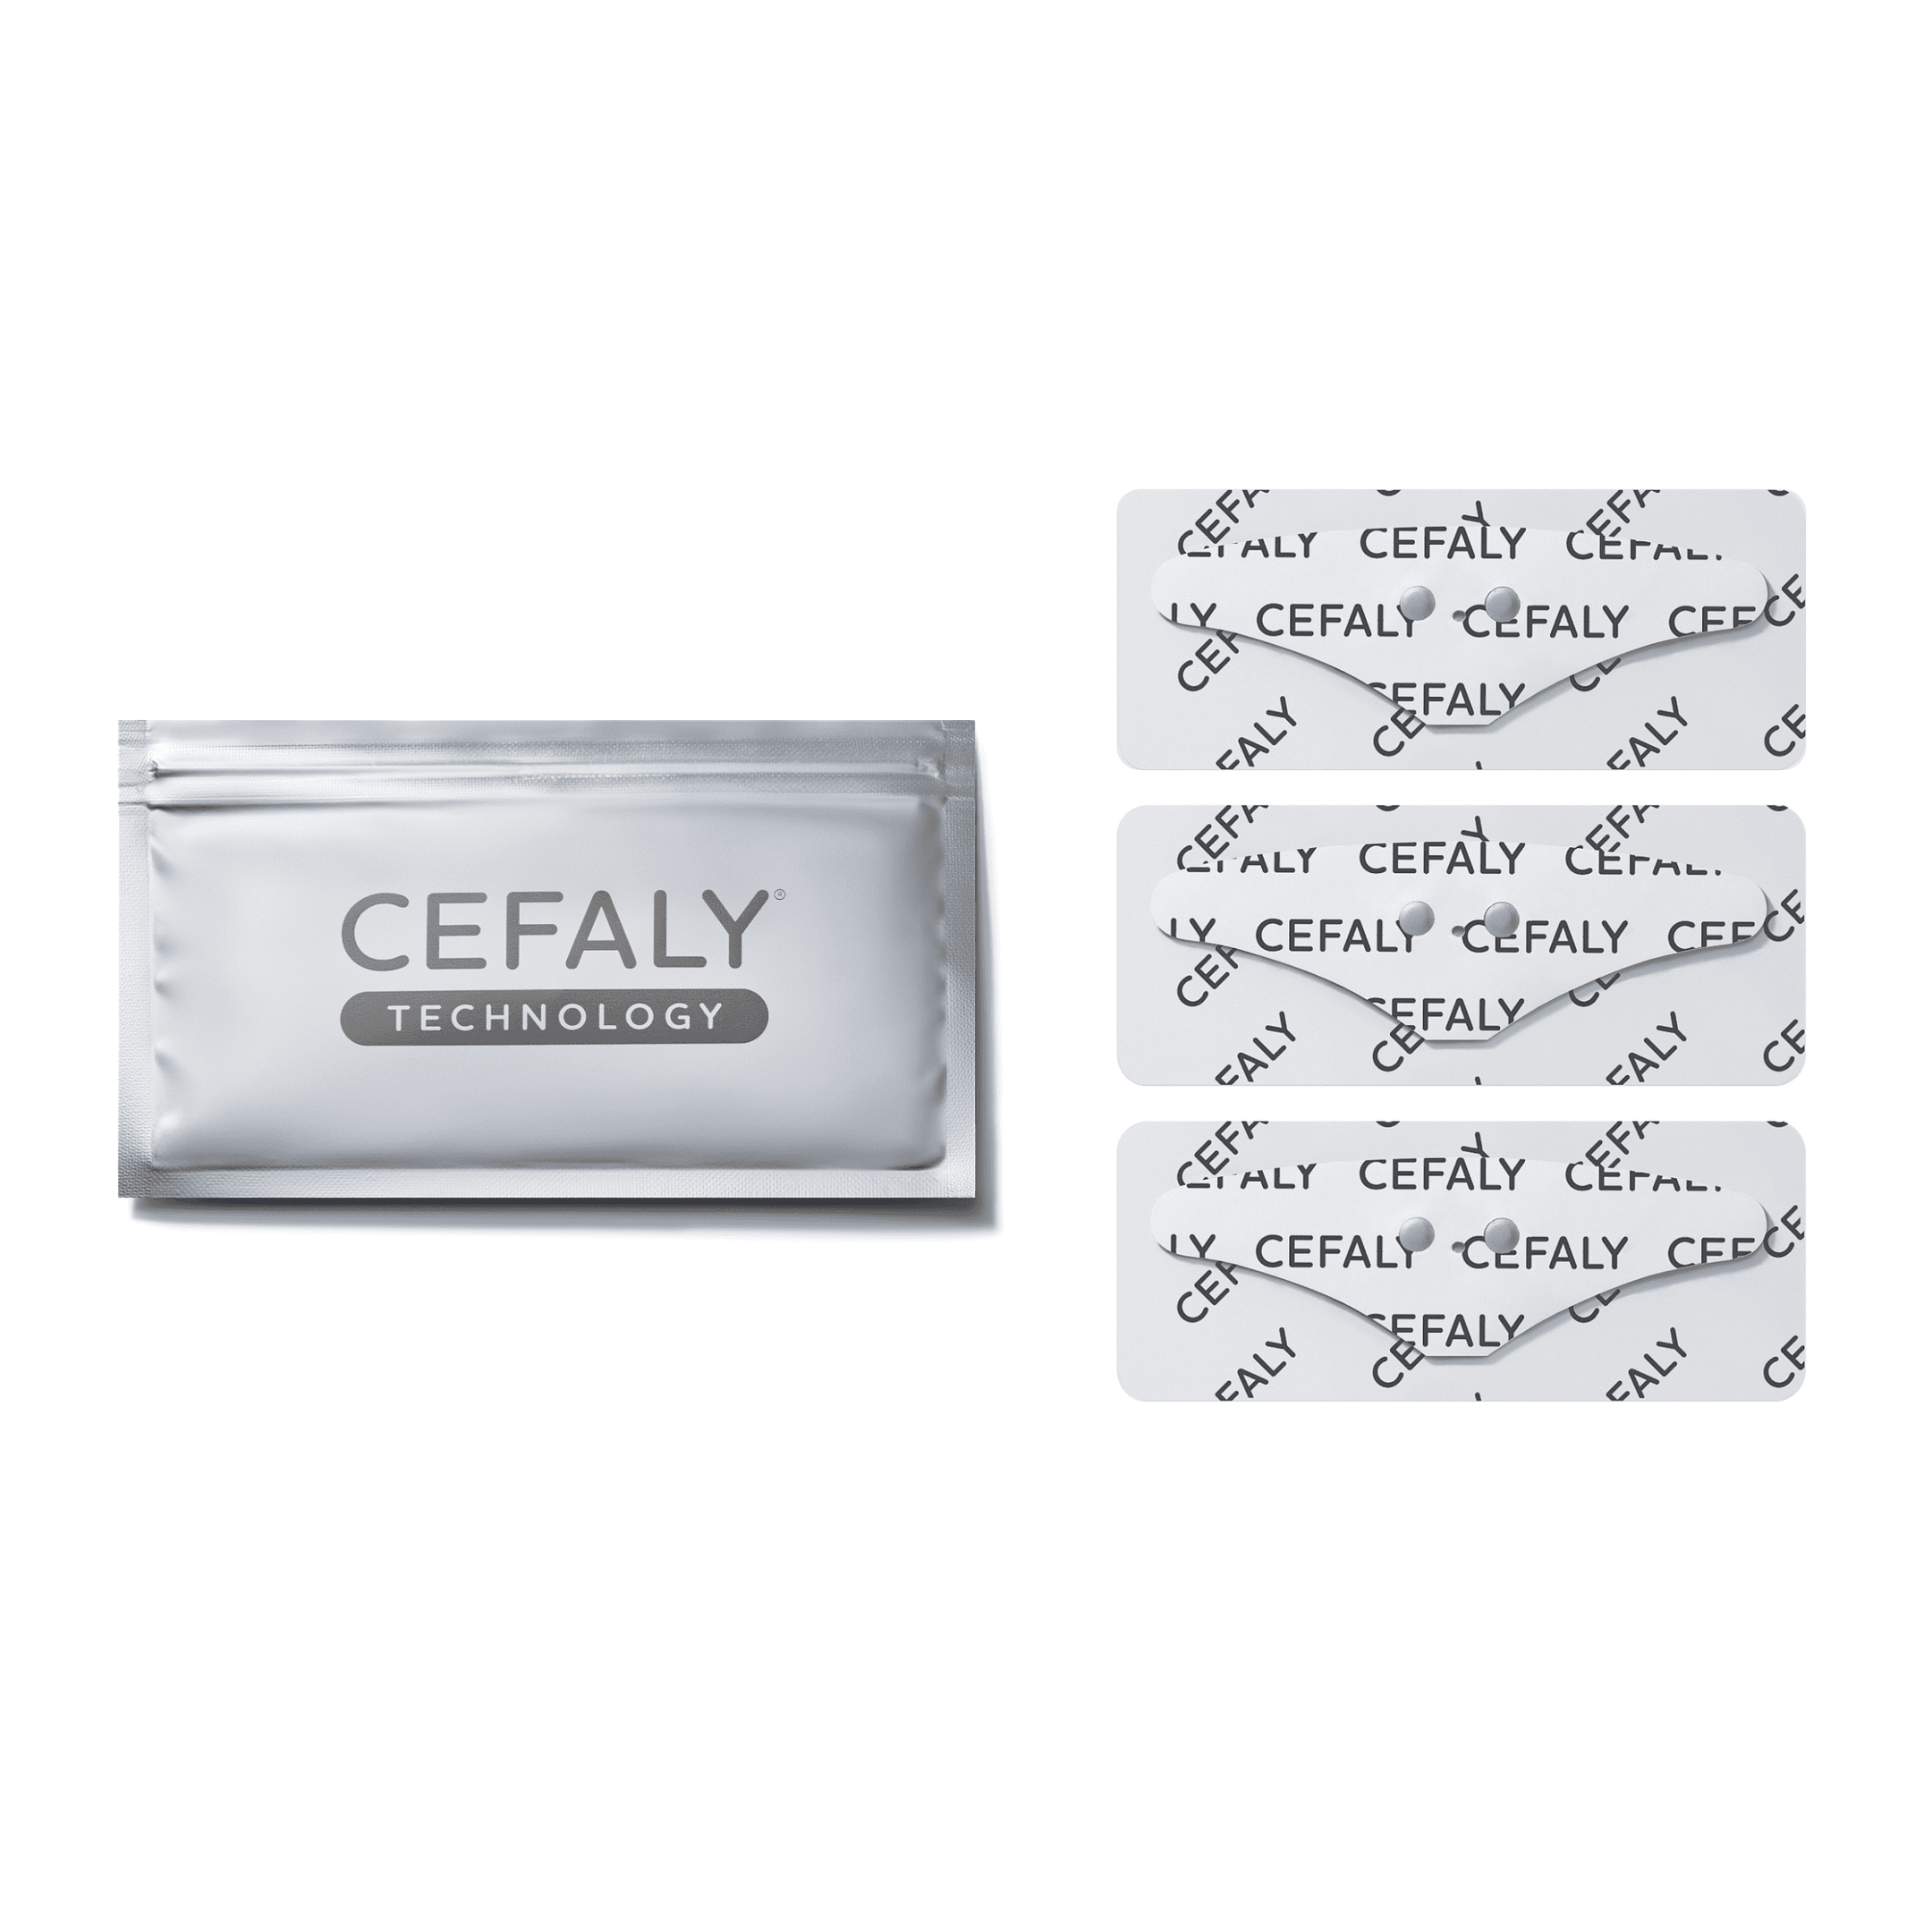  Cefaly Migraine treatment and prevention device with electrode laid out on work desk  5